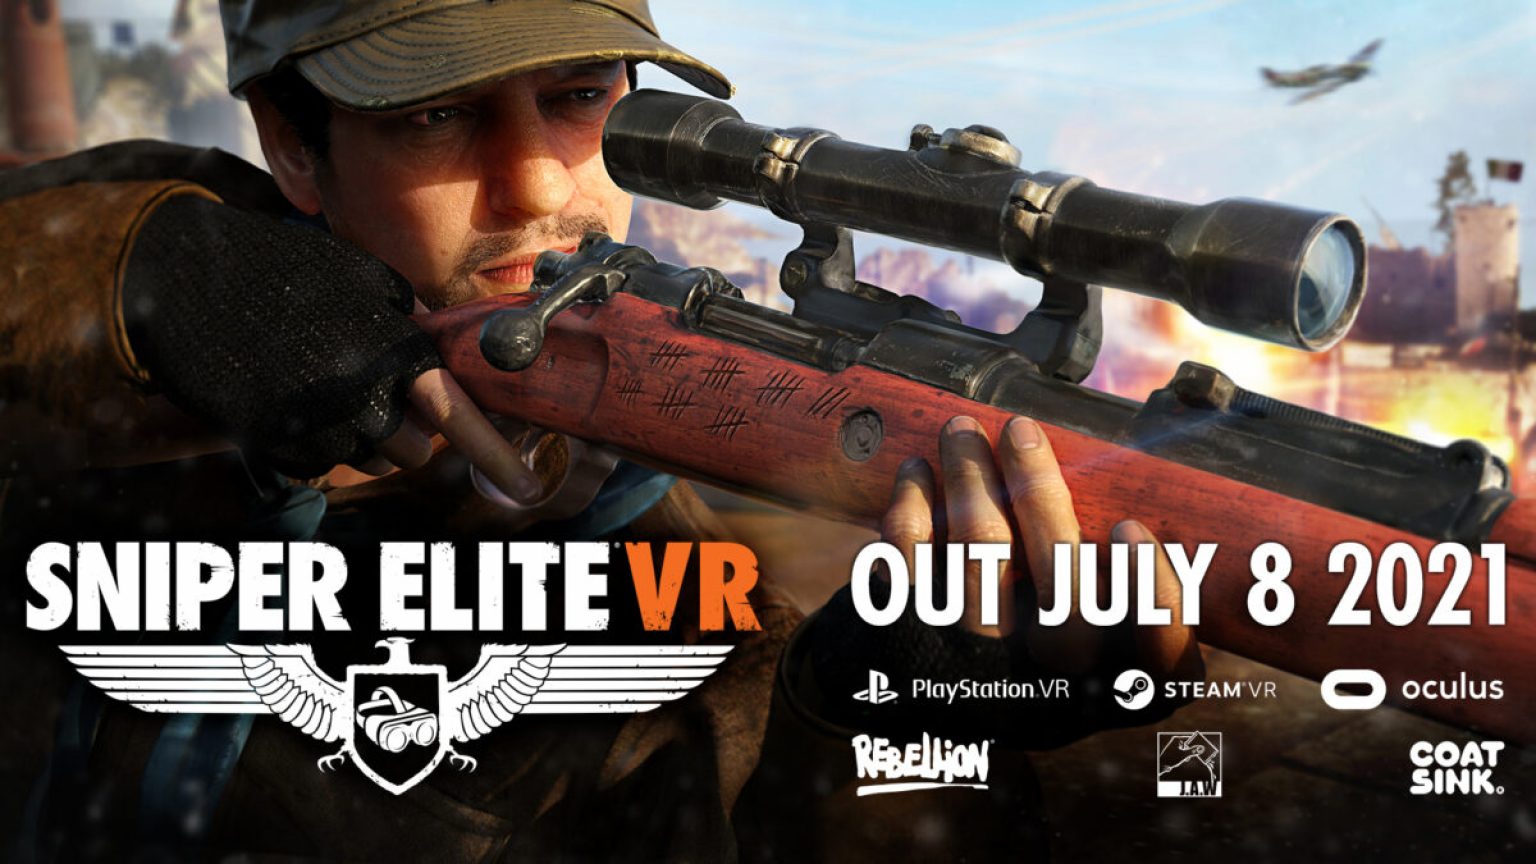 sniper-elite-vr-gets-a-new-trailer-in-anticipation-of-its-july-8